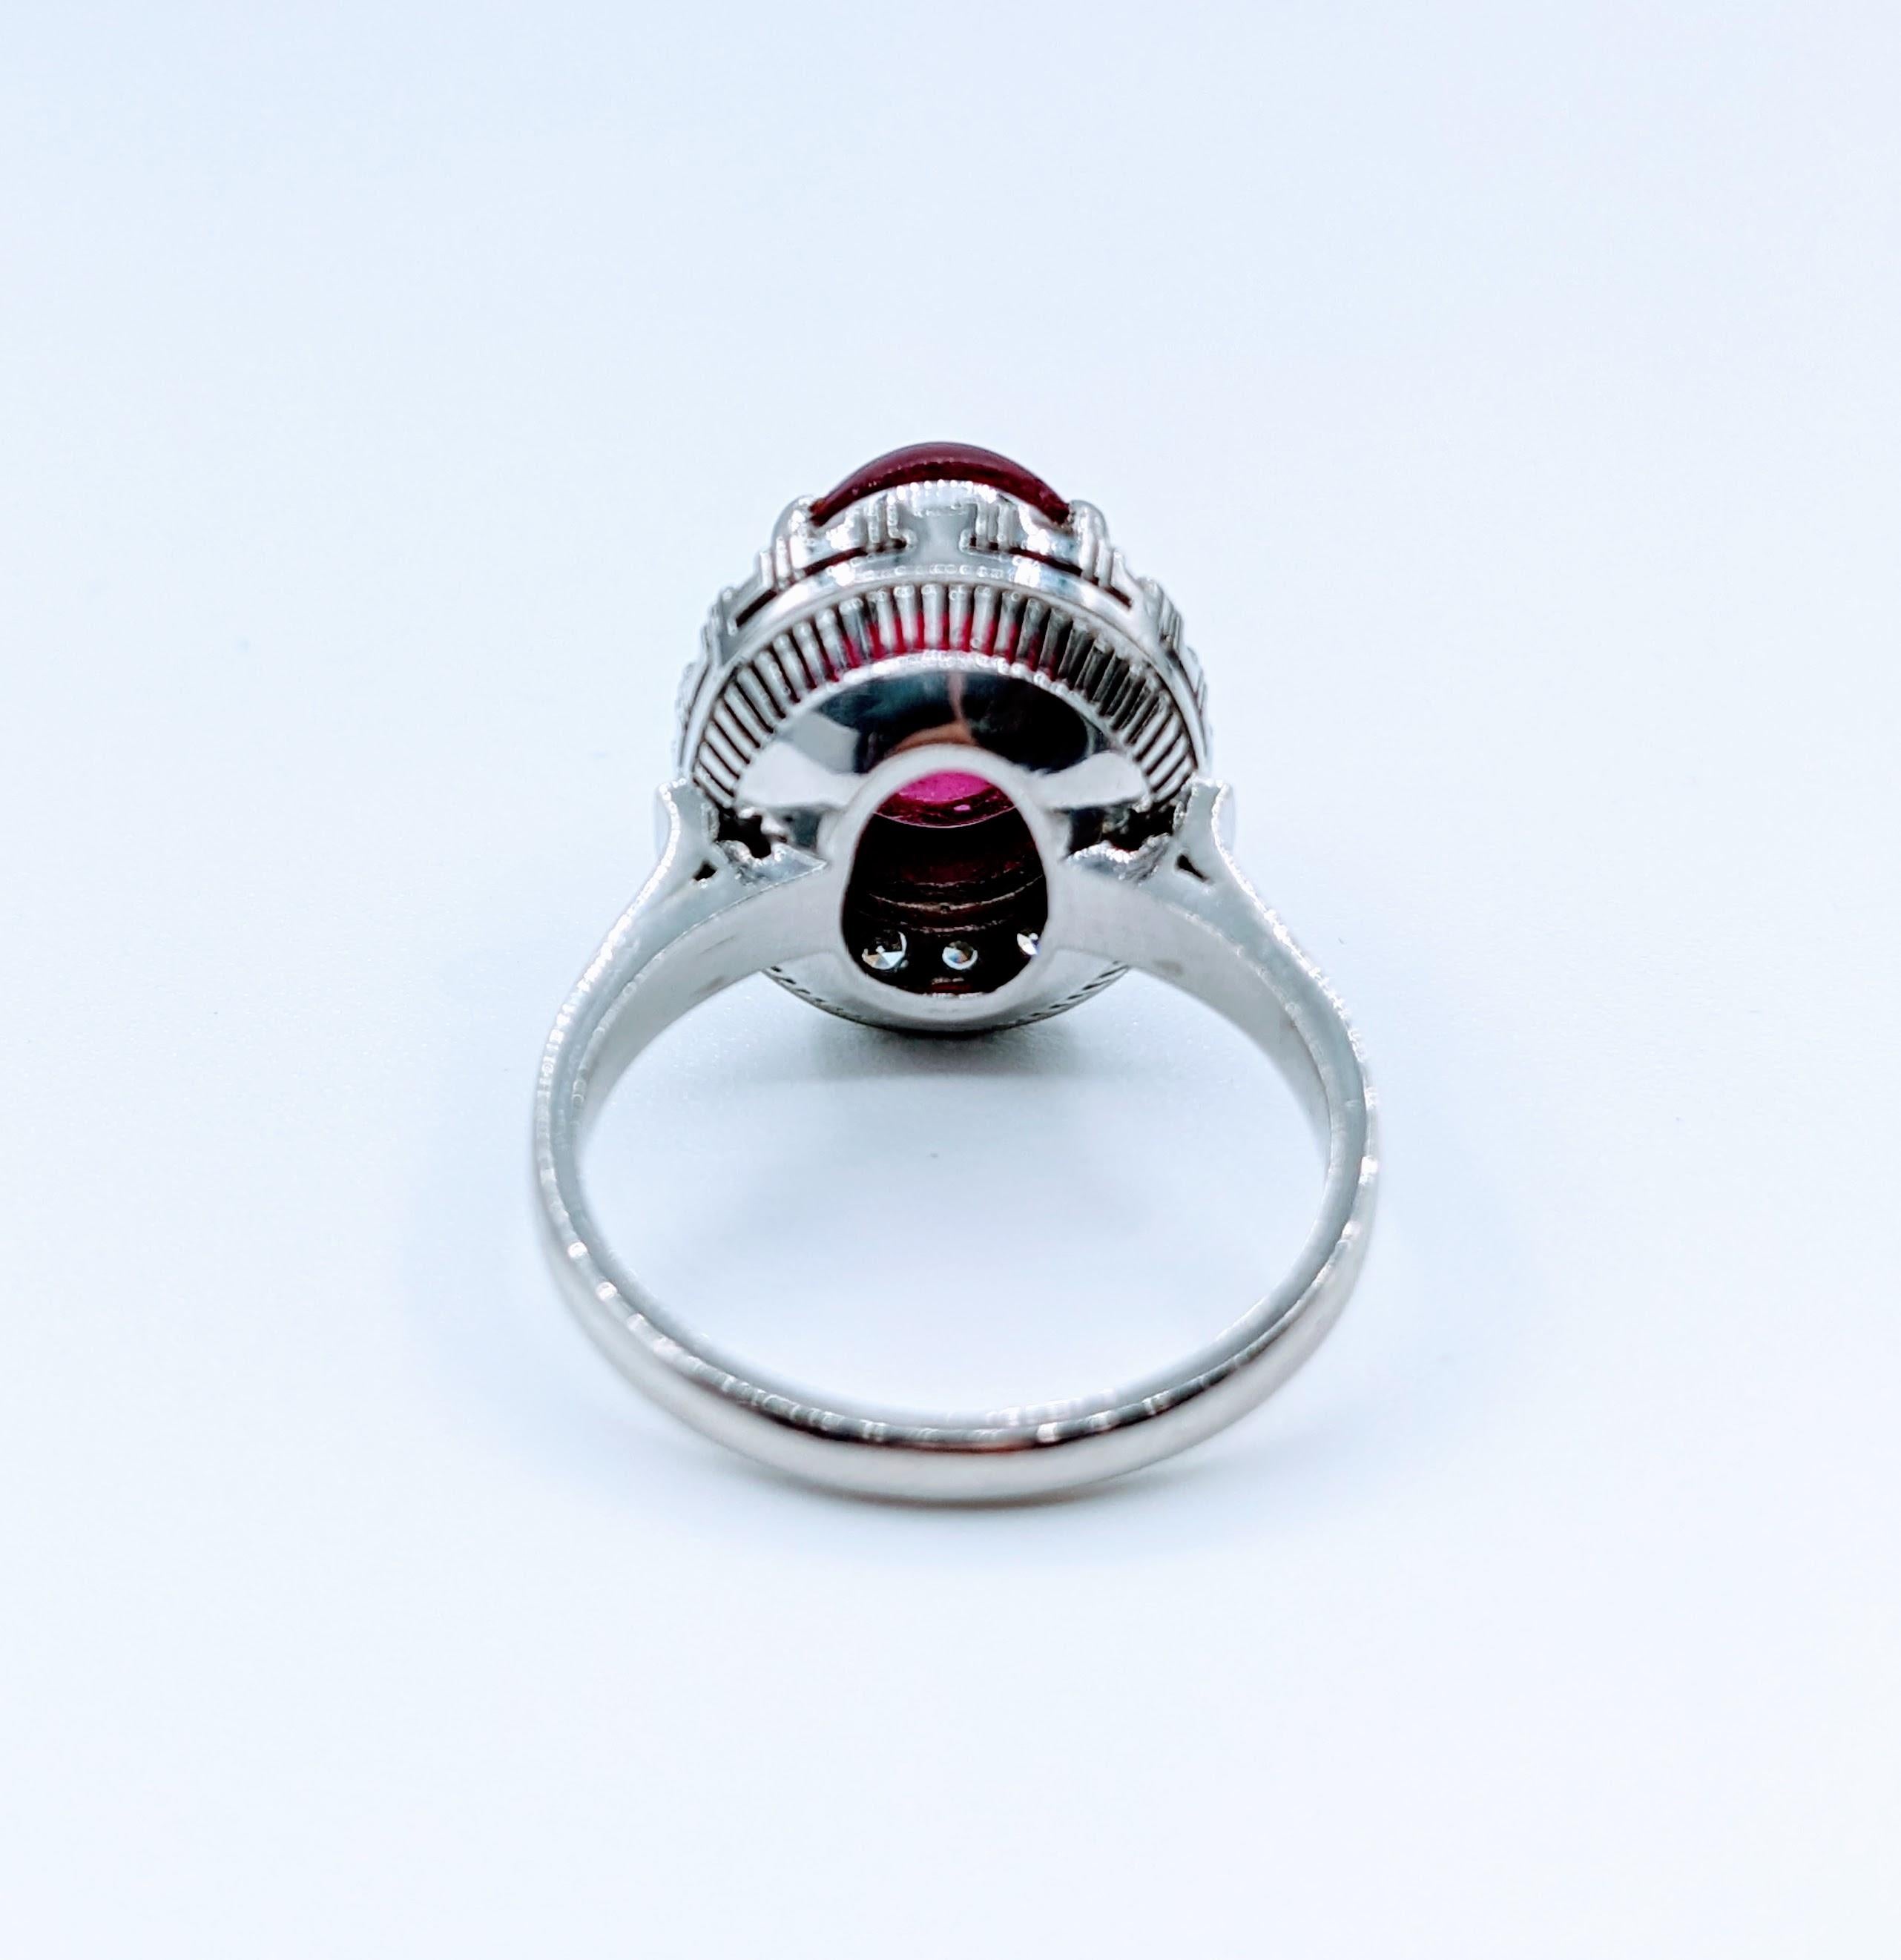 Magnificent 4.43ct Rubellite Cabochon Tourmaline & Diamond Platinum Ring In Excellent Condition For Sale In Bloomington, MN